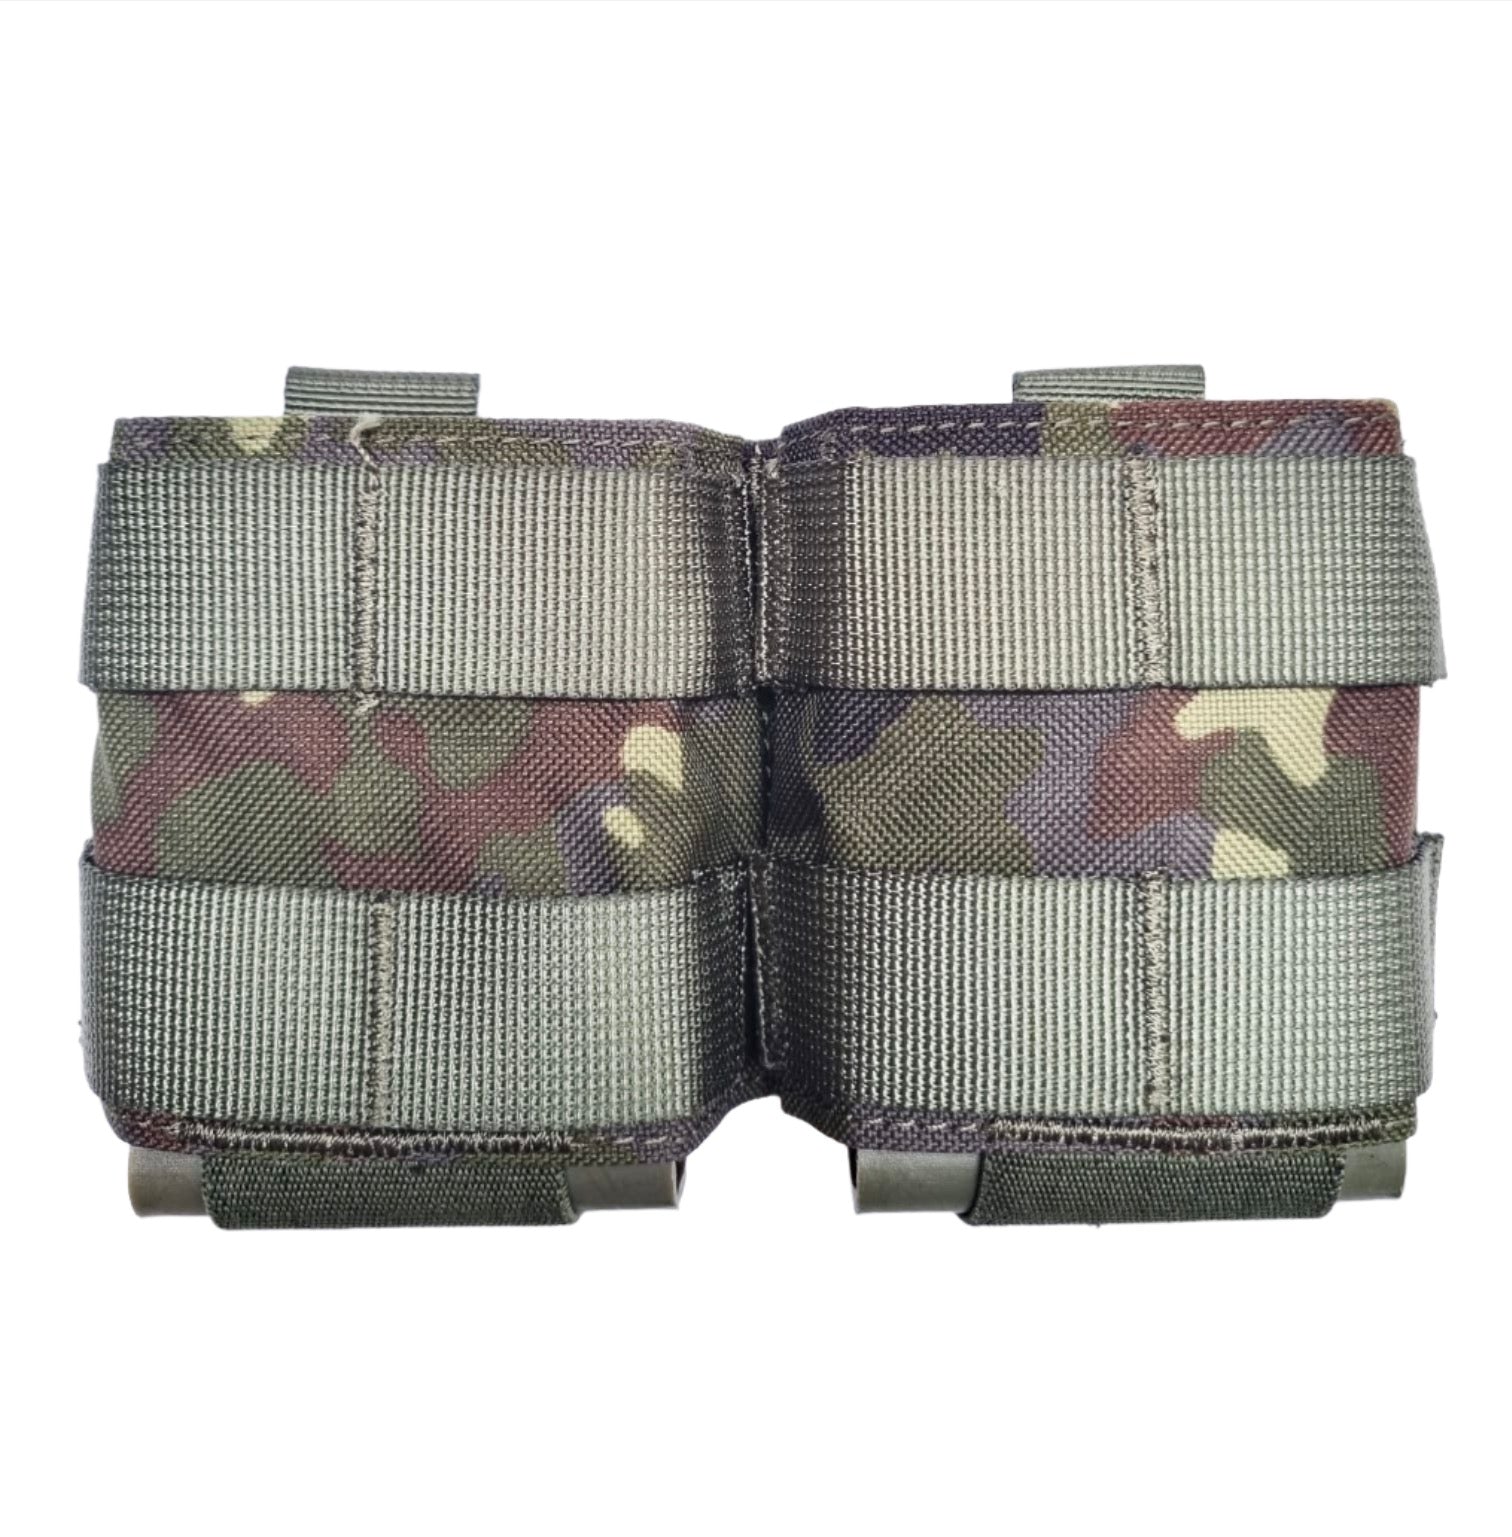 SHE-23032 GRIPTAC DOUBLE M4/M16  MAG POUCH FLECTARN